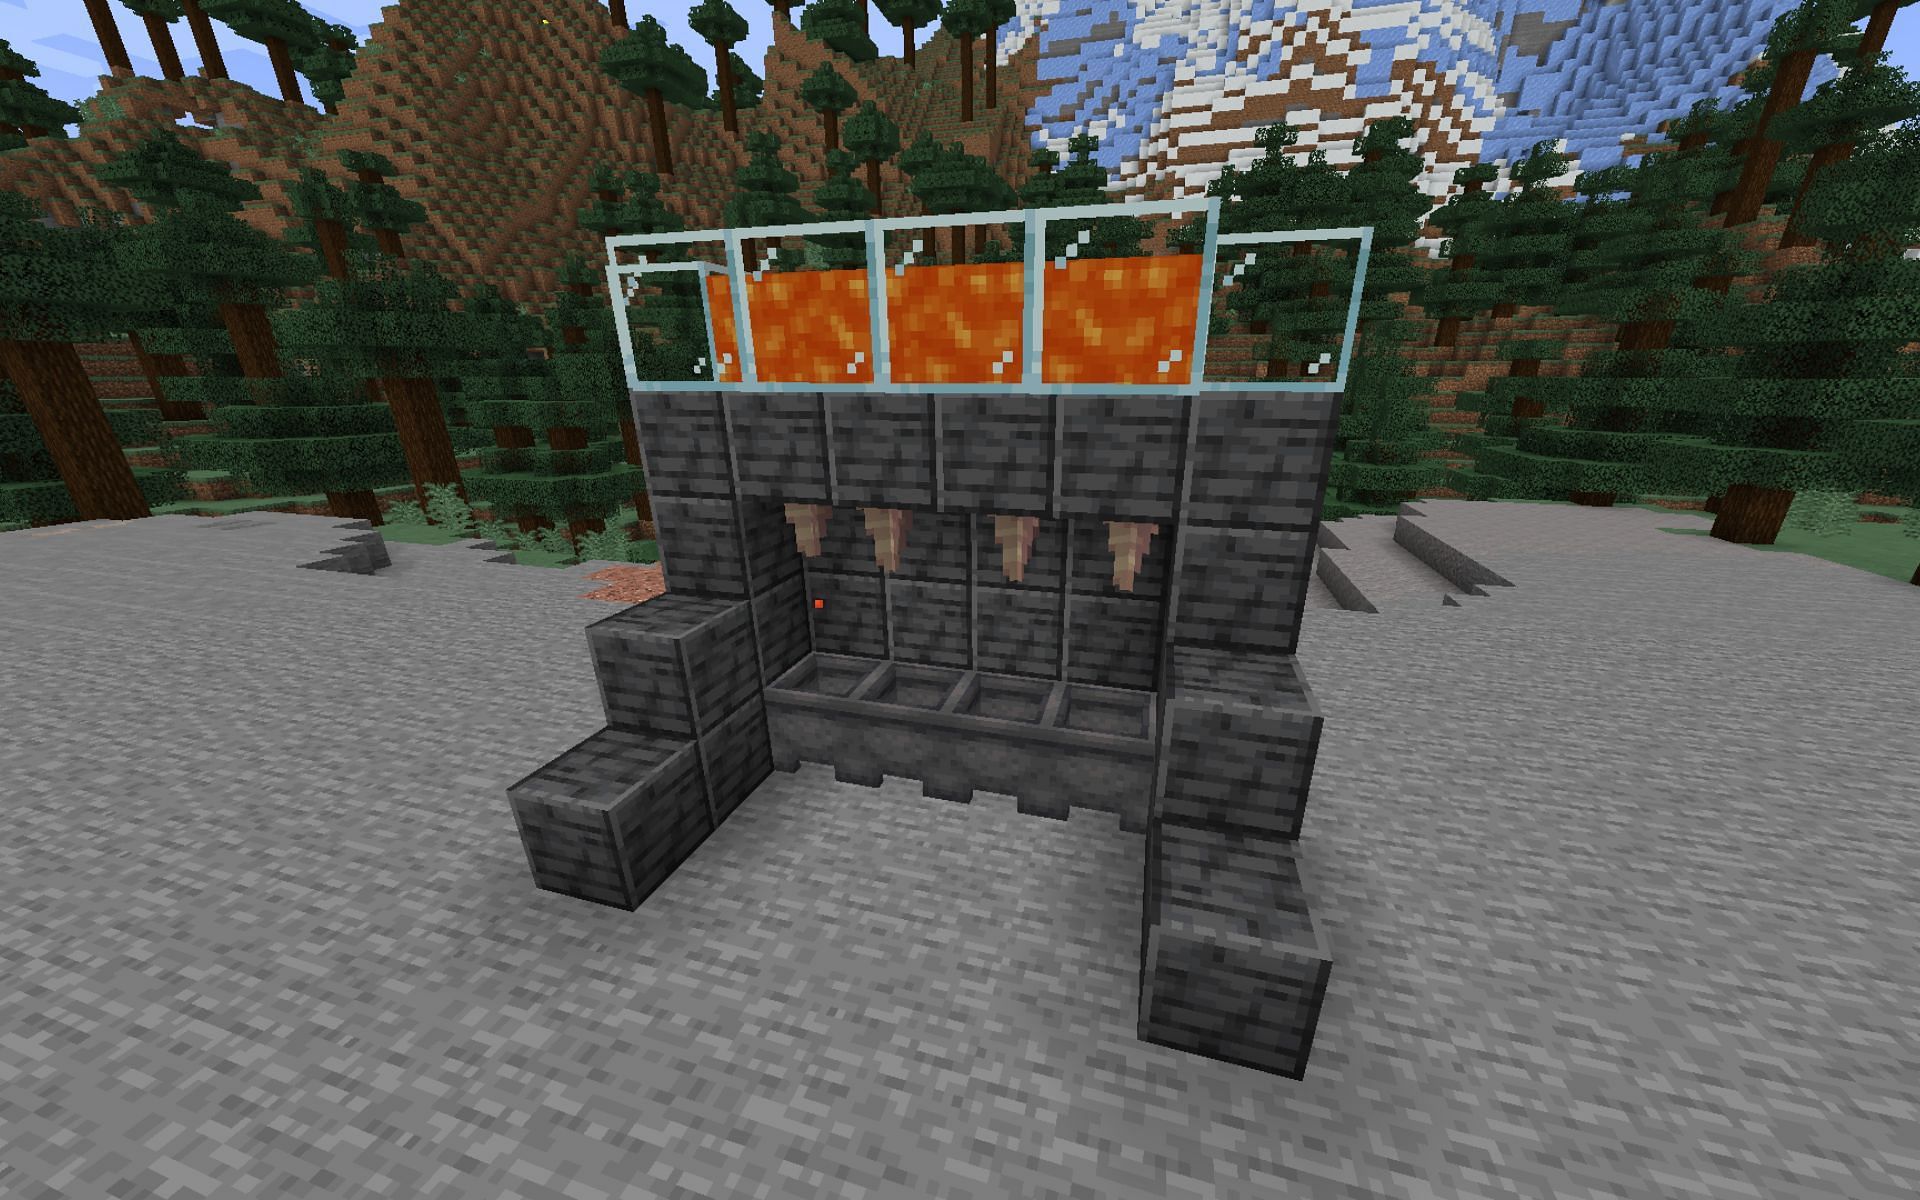 The cauldron is an essential part of the lava farm in Minecraft (Image via Mojang)